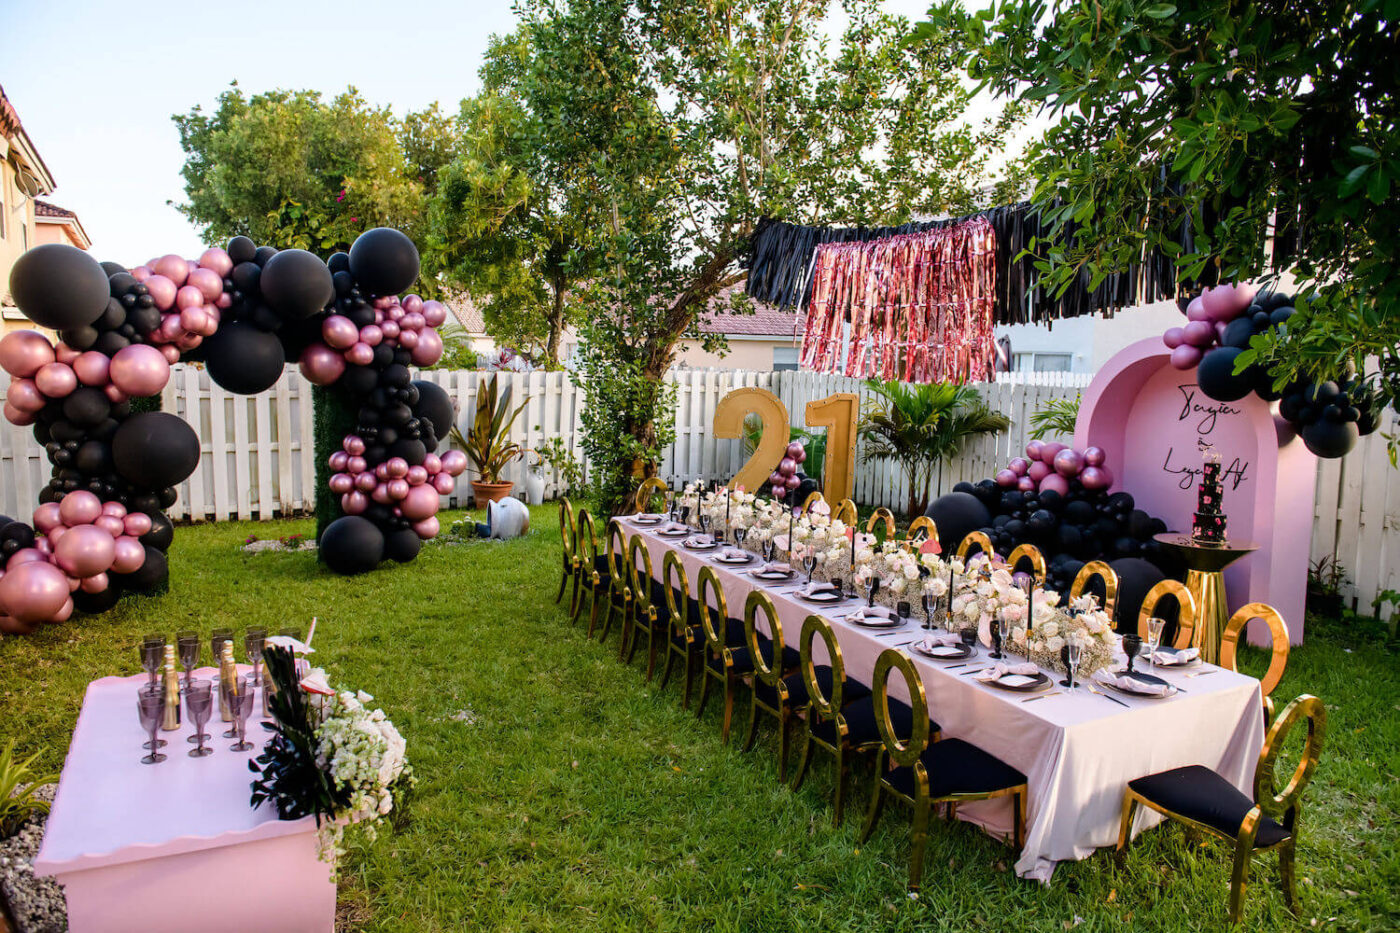 24 Small Birthday Party Ideas You Won't Find Anywhere Else